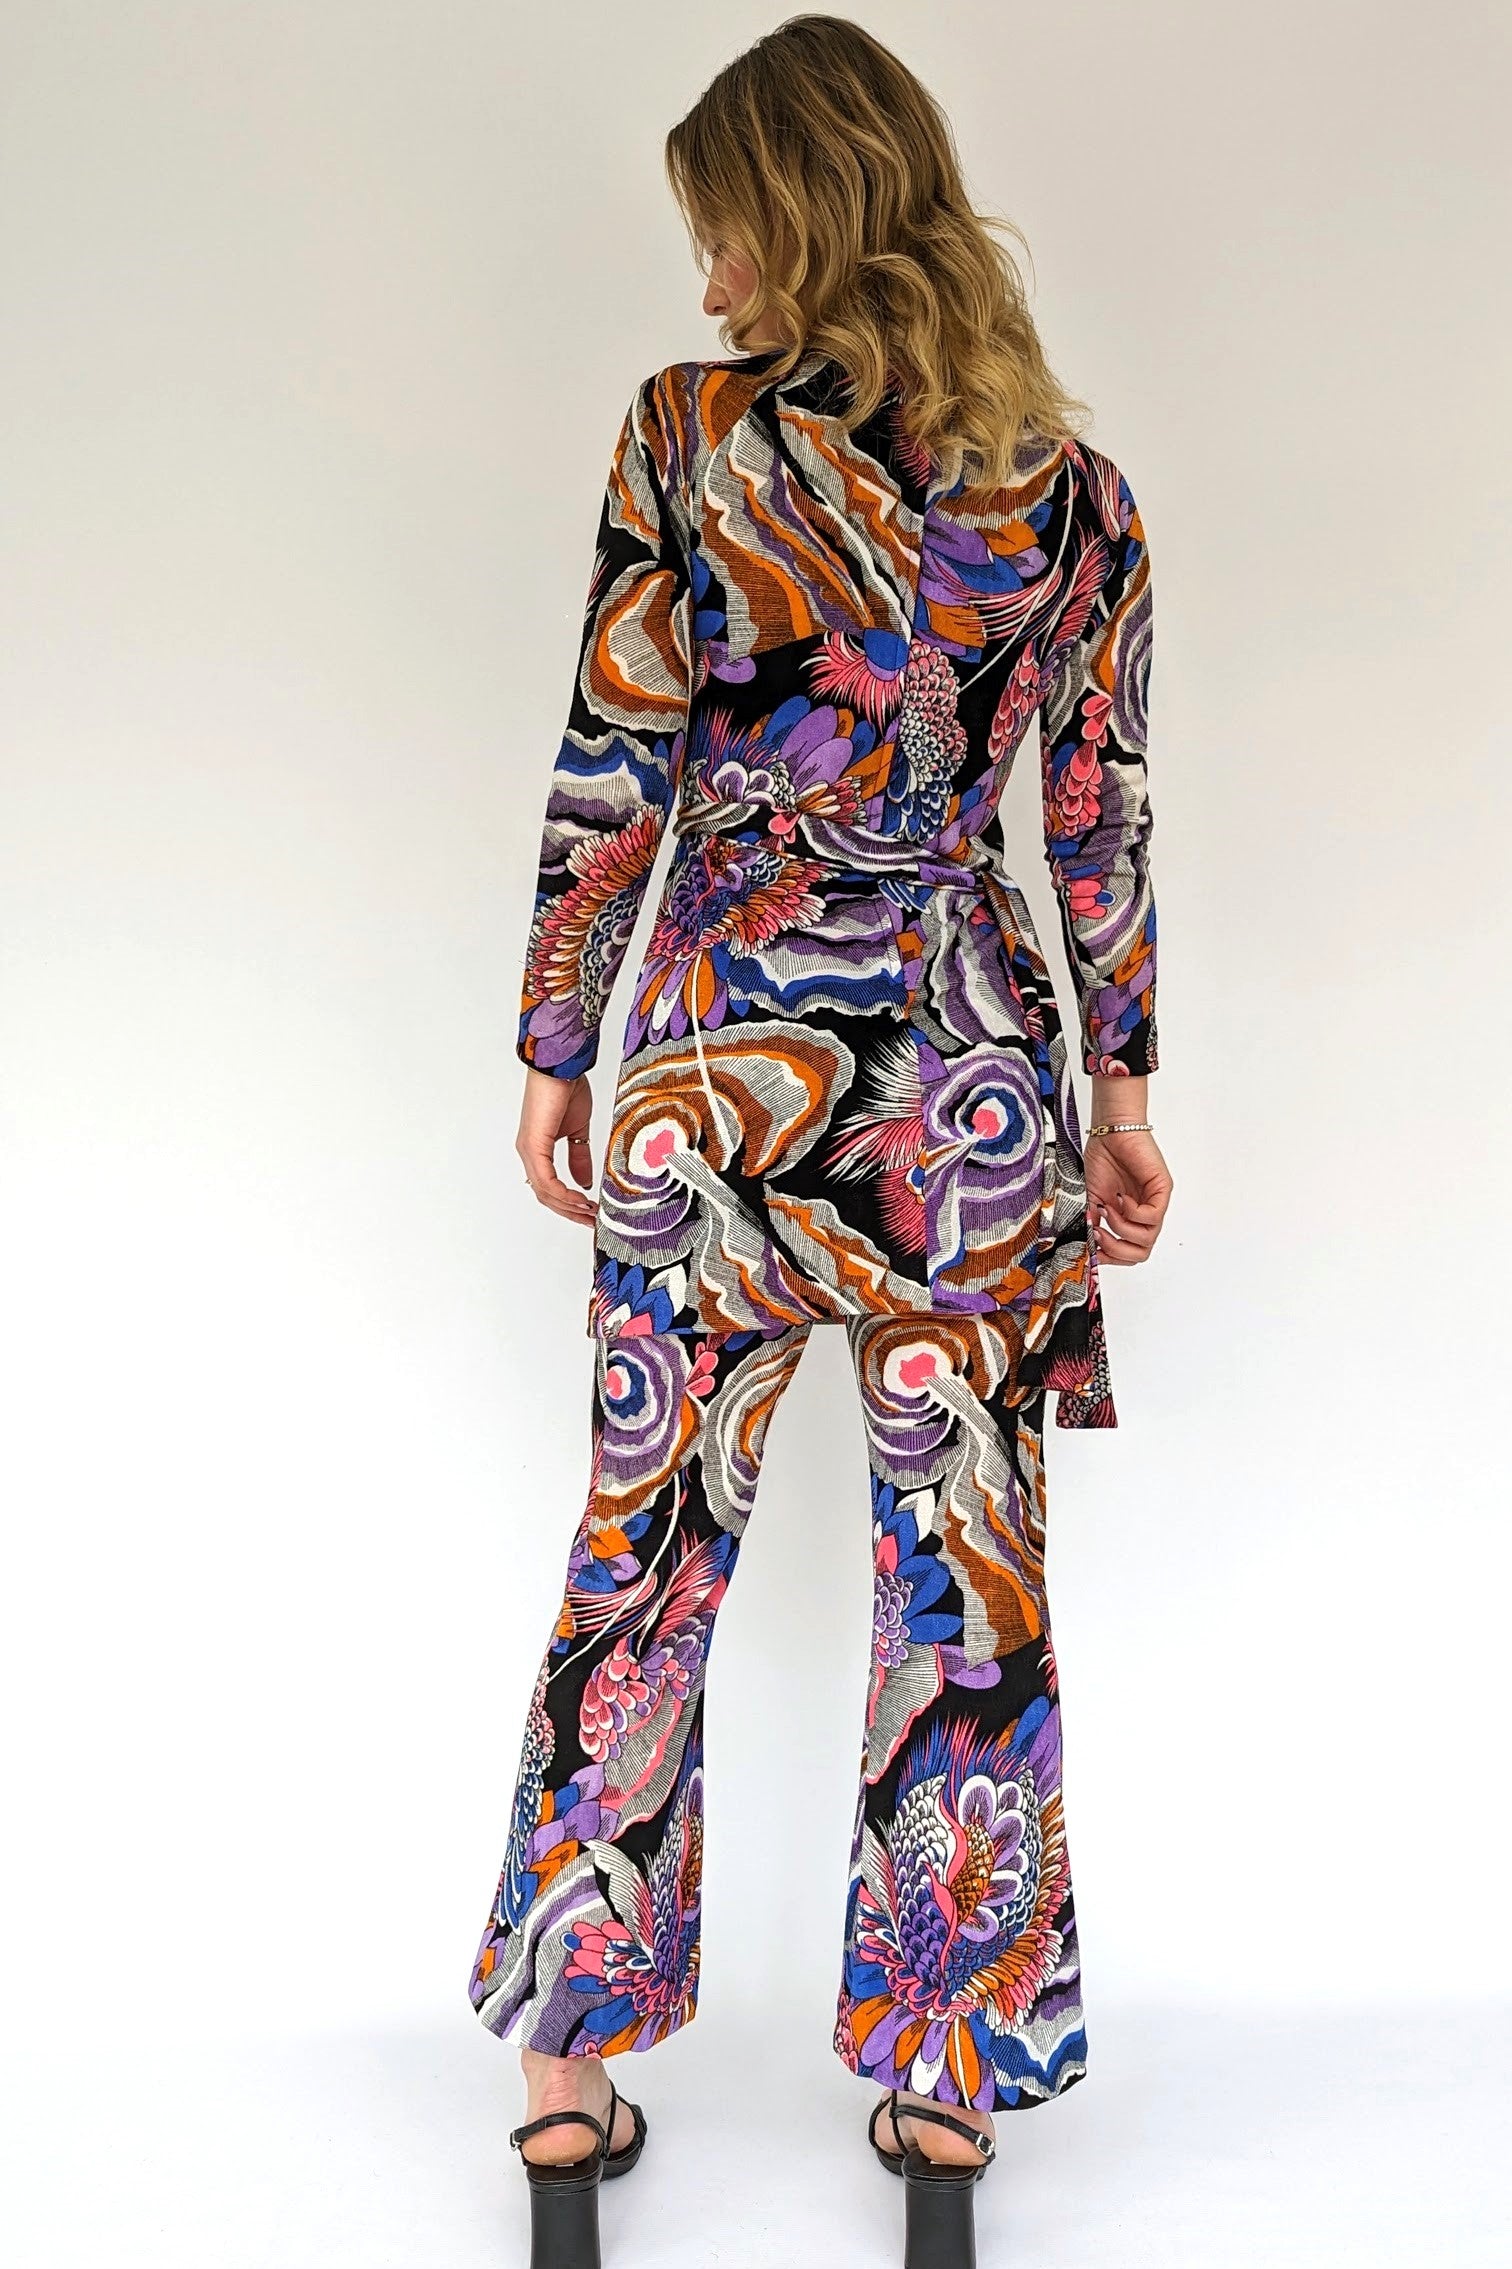 1970s psychedelic trouser suit back